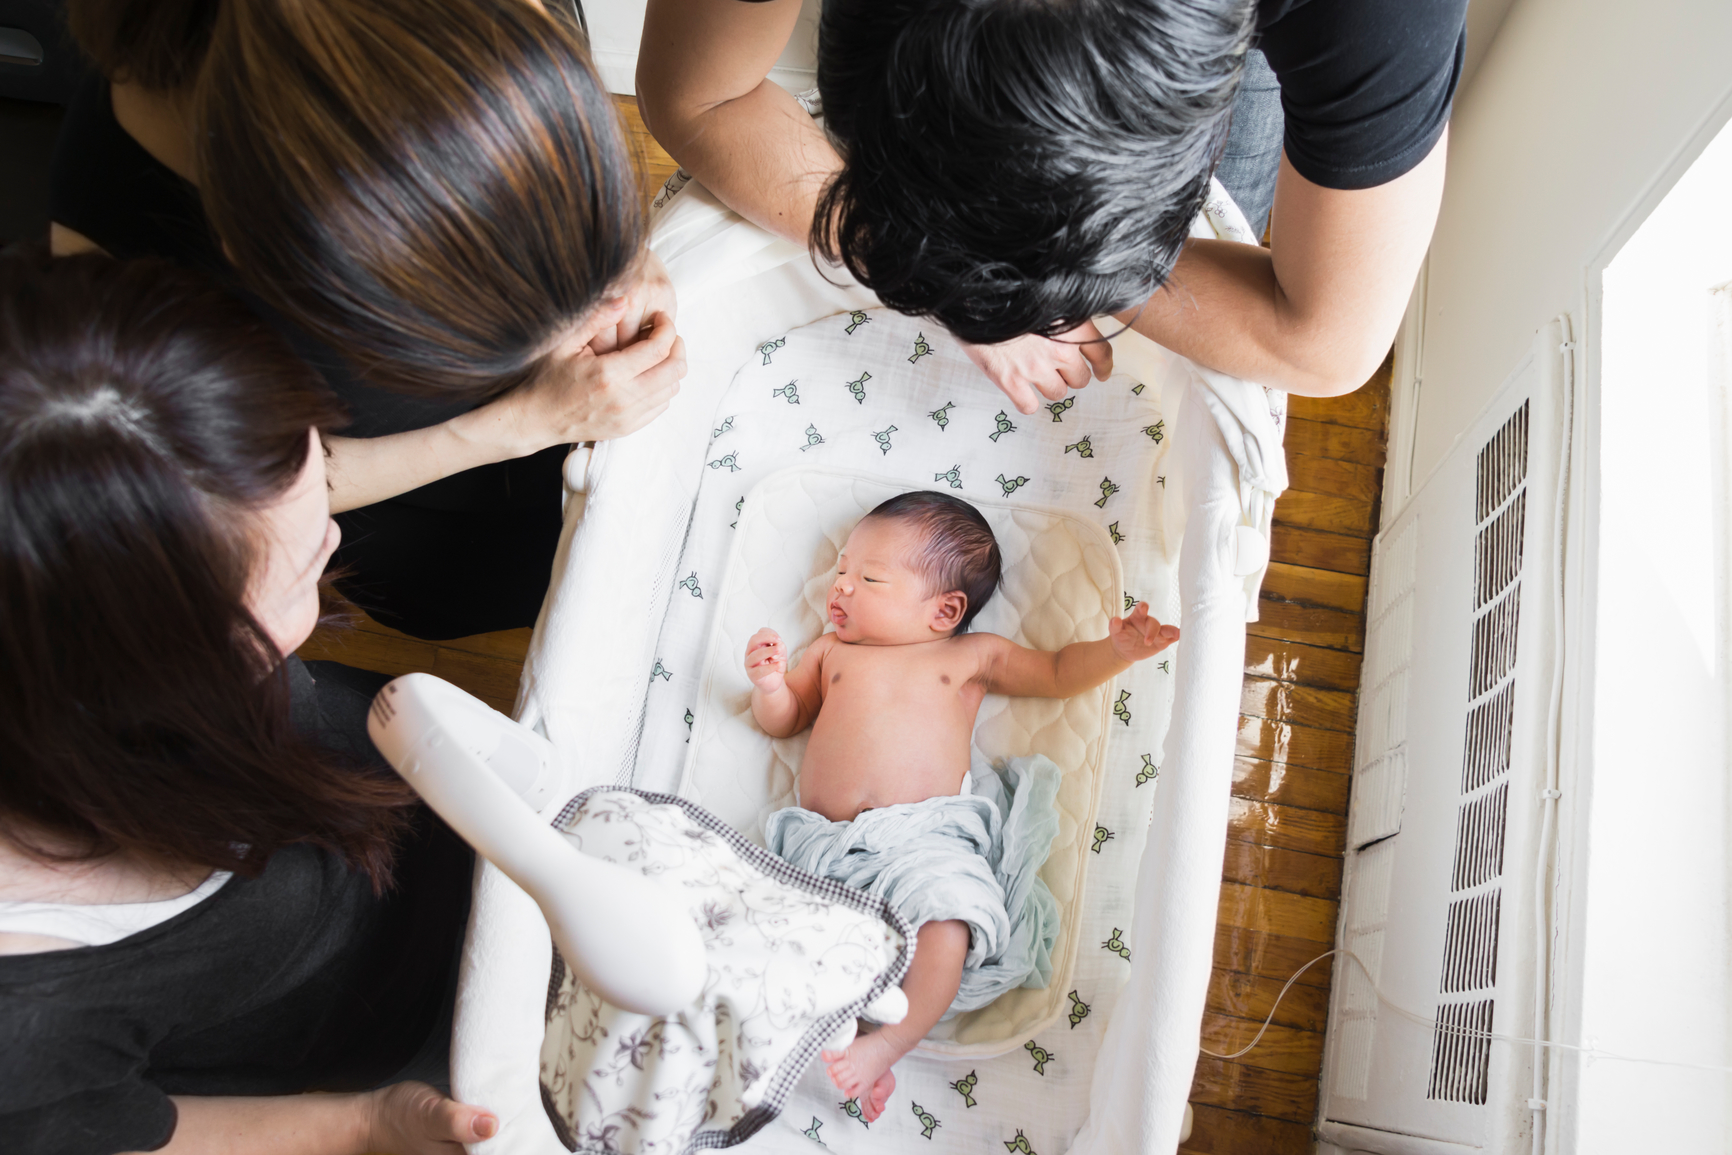 An 8-day old Japanese newborn baby with his parents and grandmother